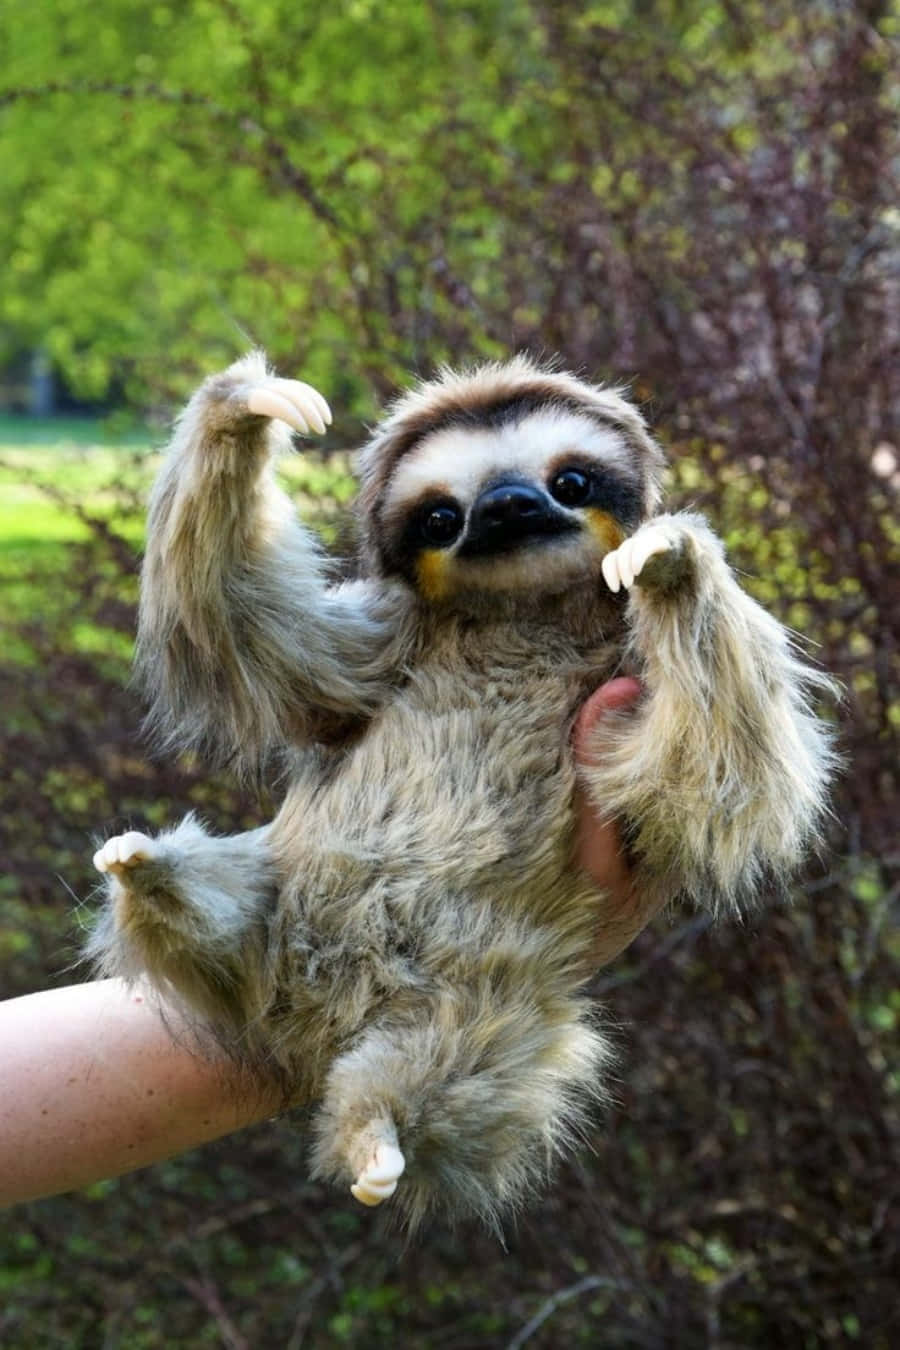 This cute baby sloth loves to snuggle and hang out with its friends!